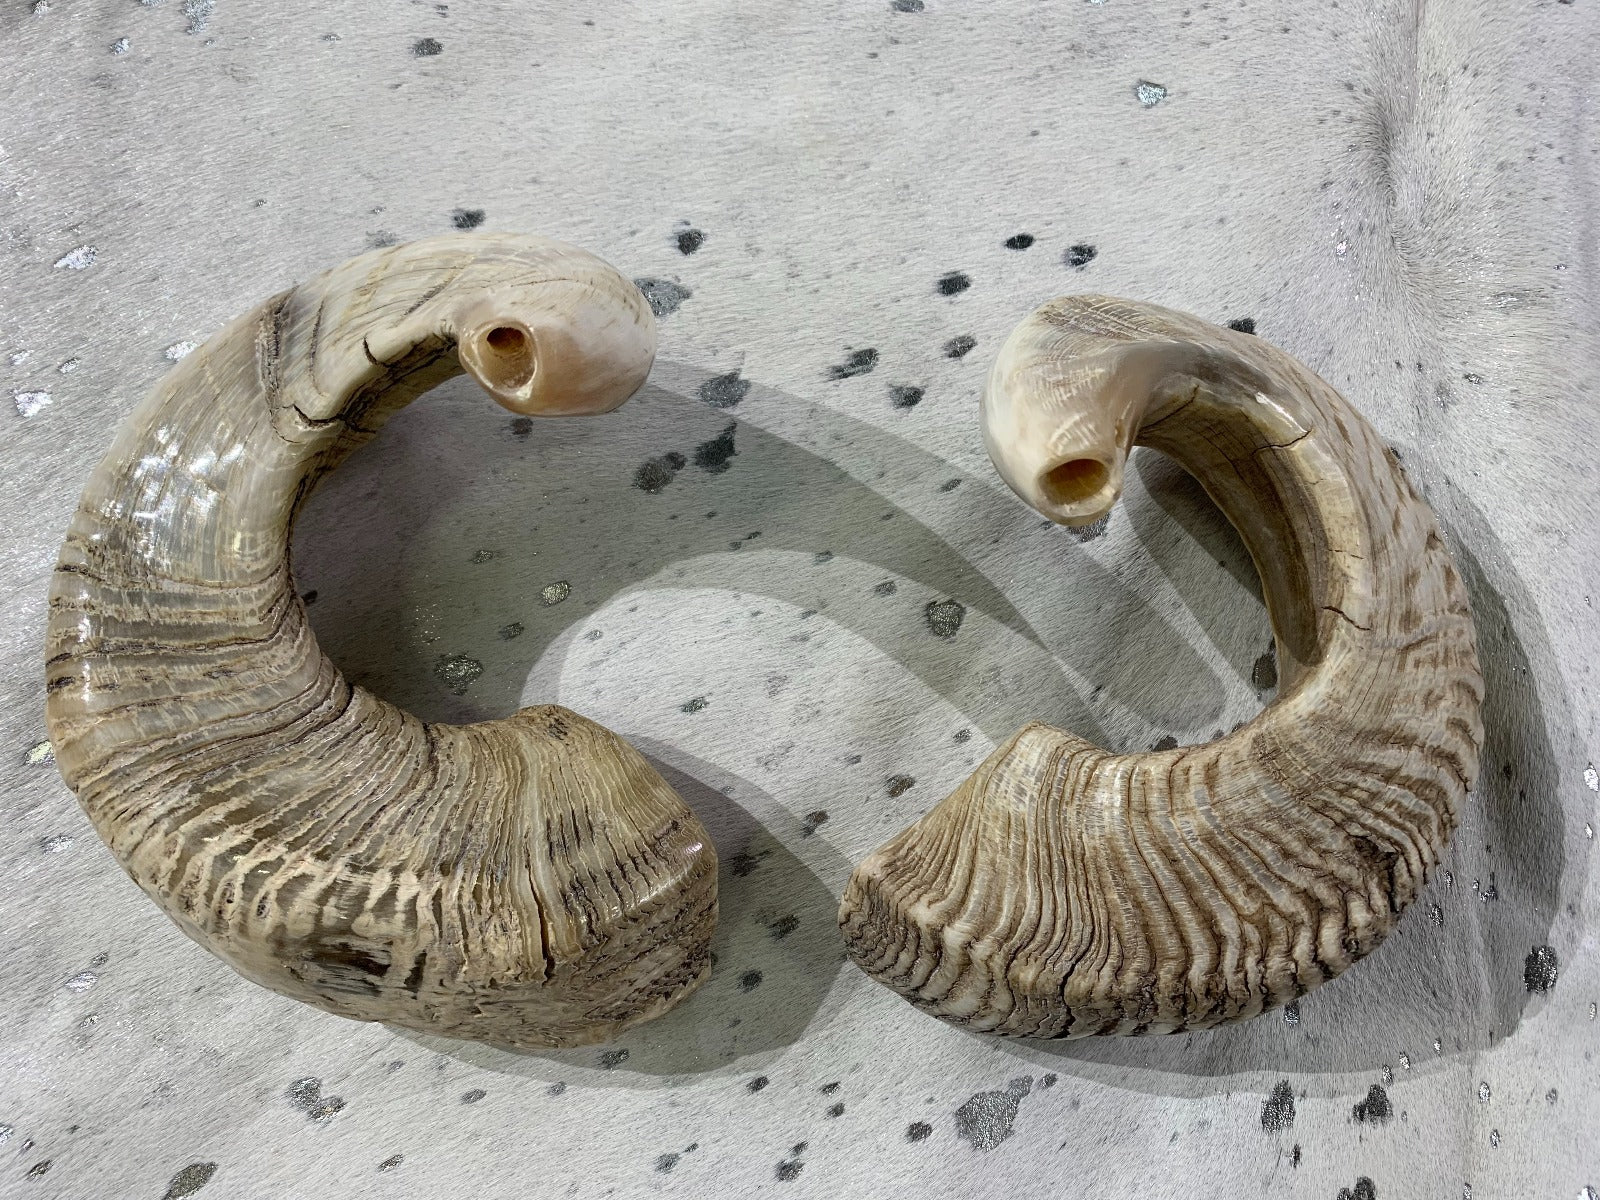 Polished Ram Horn Shofar (Sizes vary - nice one can be around 22" around curve)